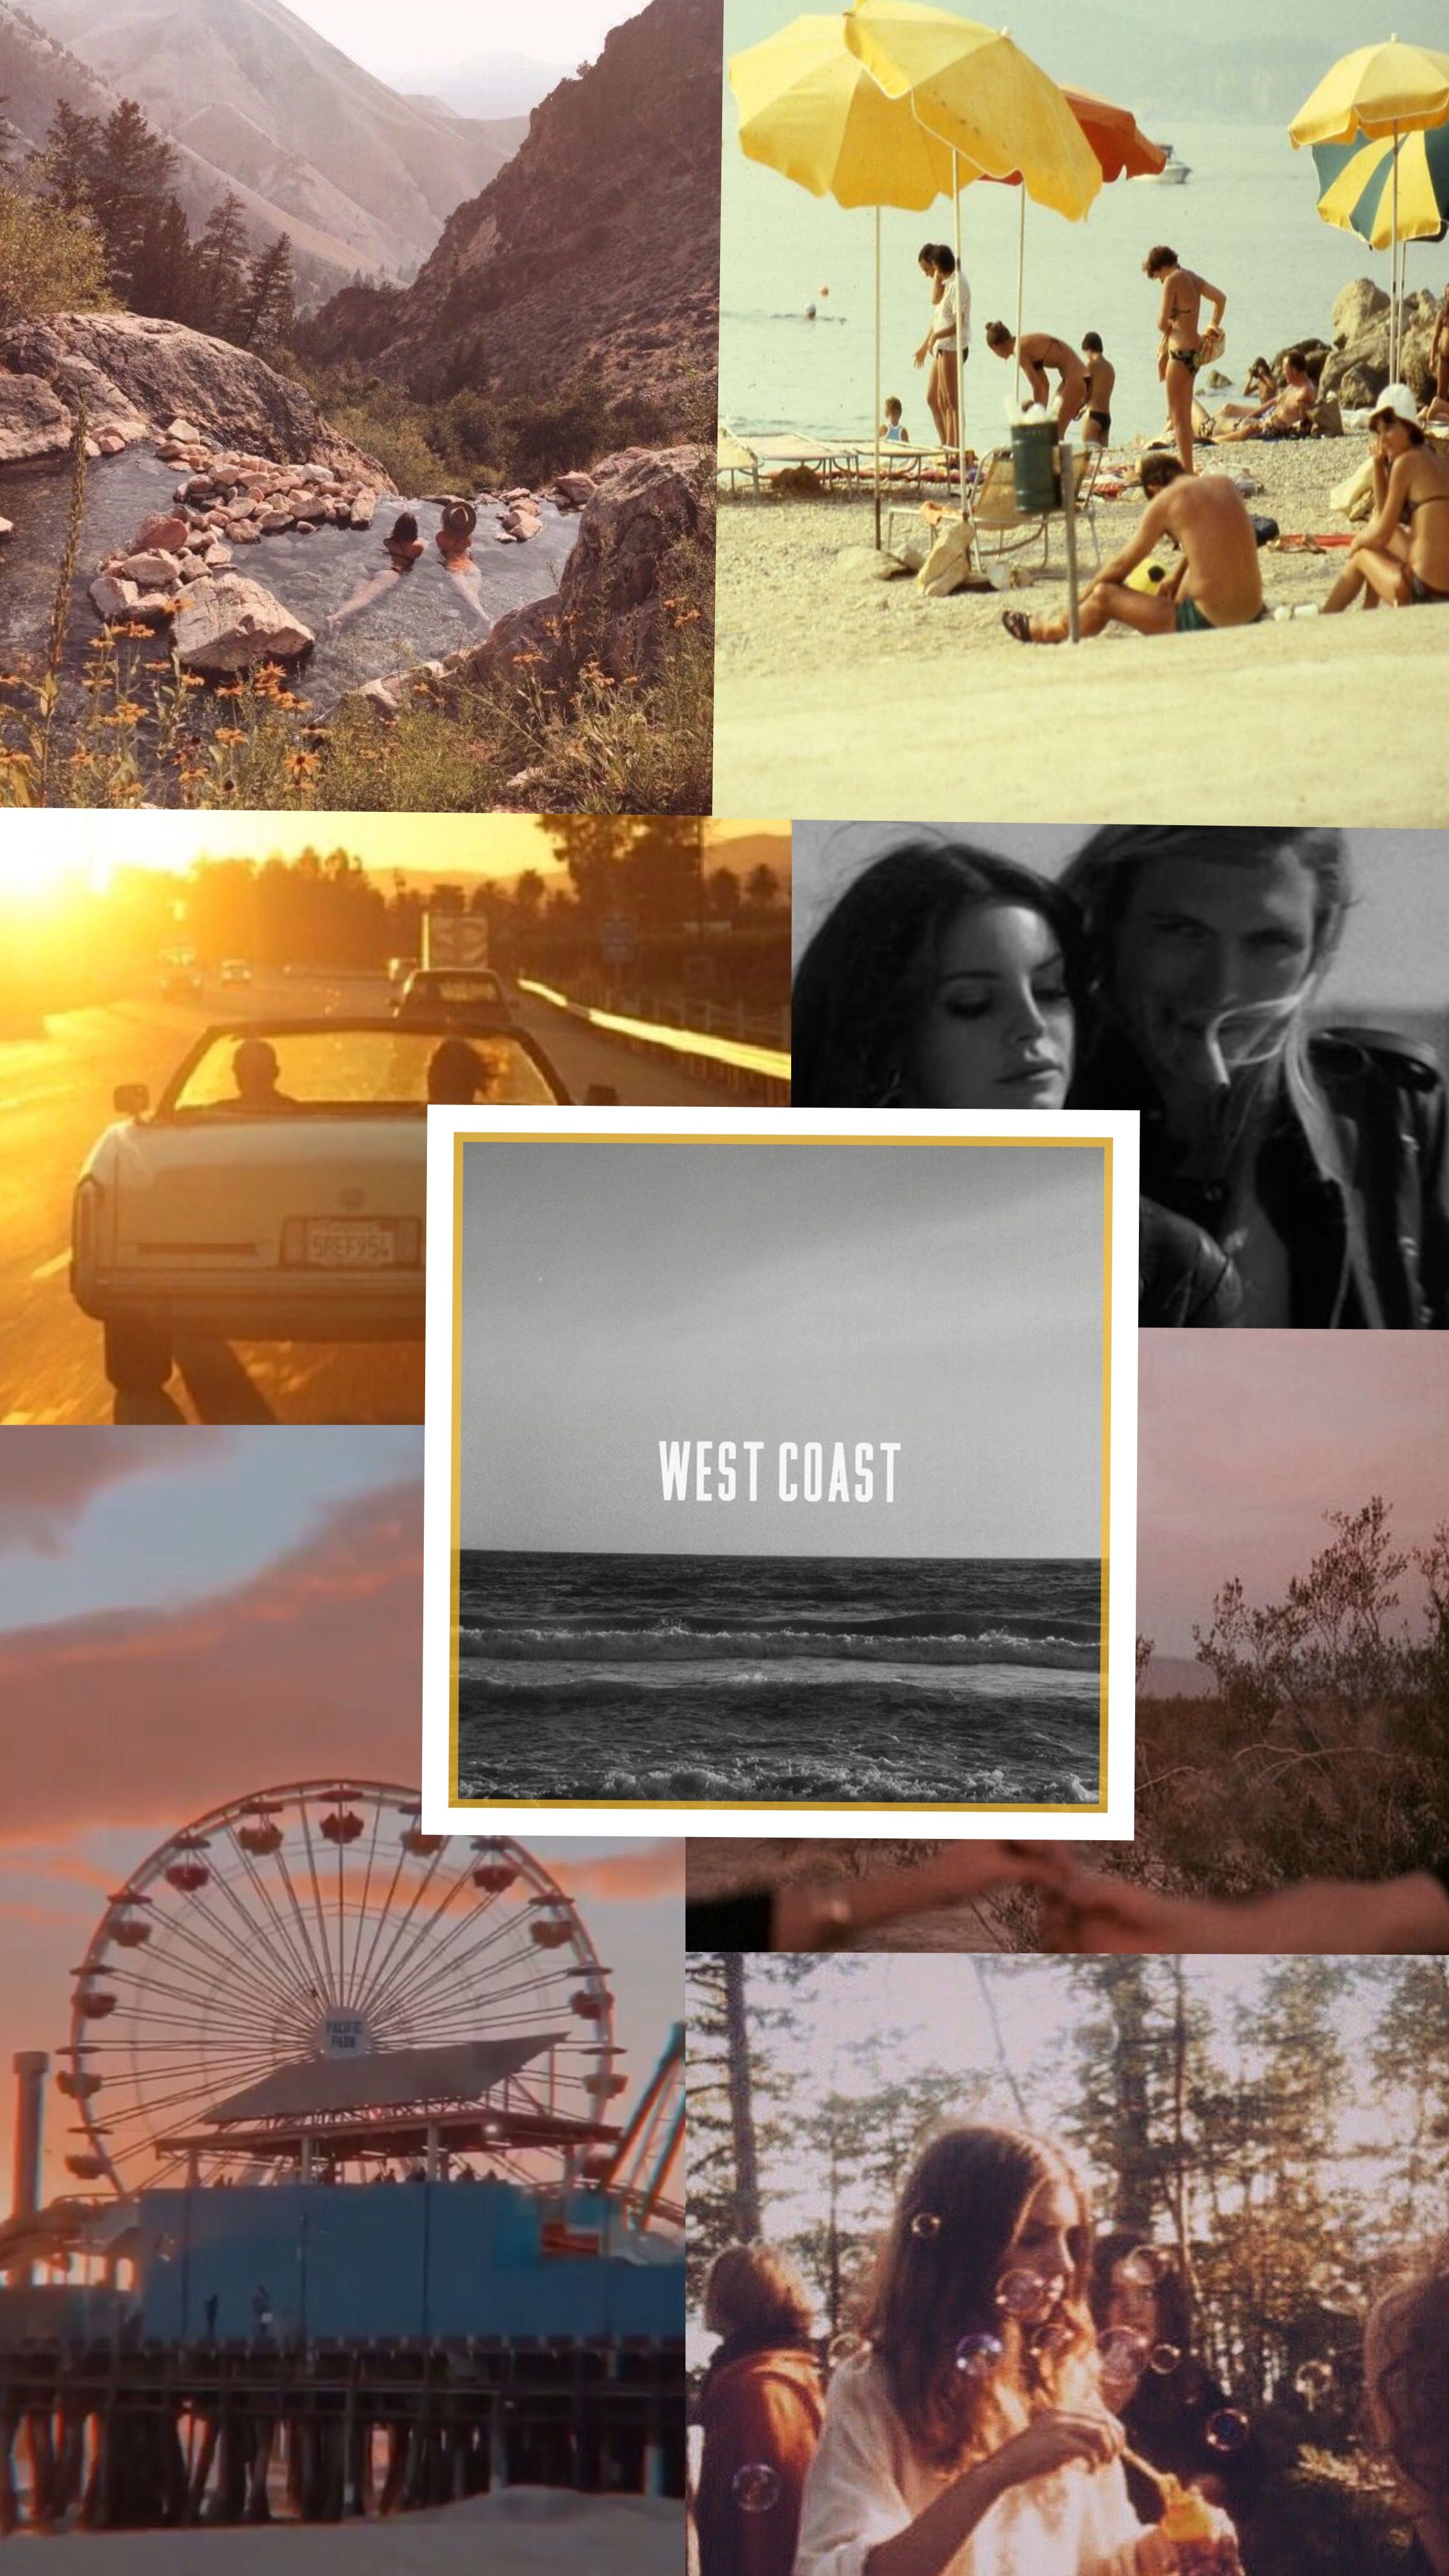 West Coast Collage with a ferris wheel, beach, mountains, and people - Lana Del Rey